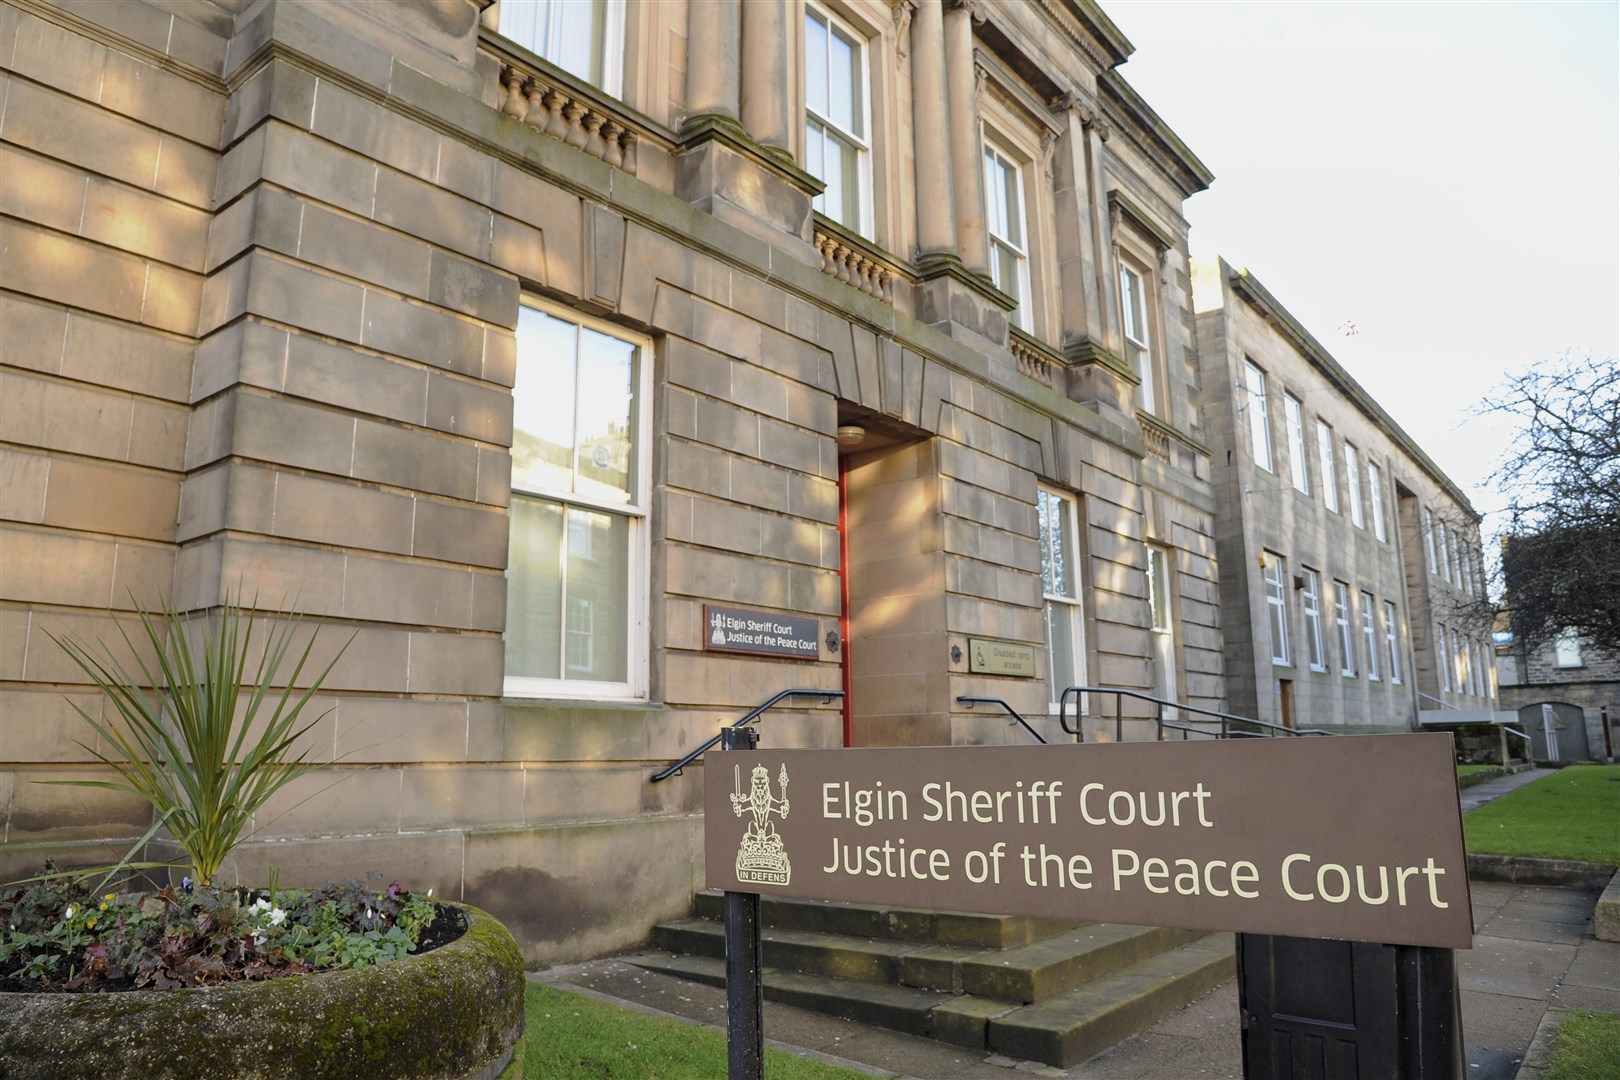 Jay Mackintosh appeared via a video link at Elgin Sheriff Court today.